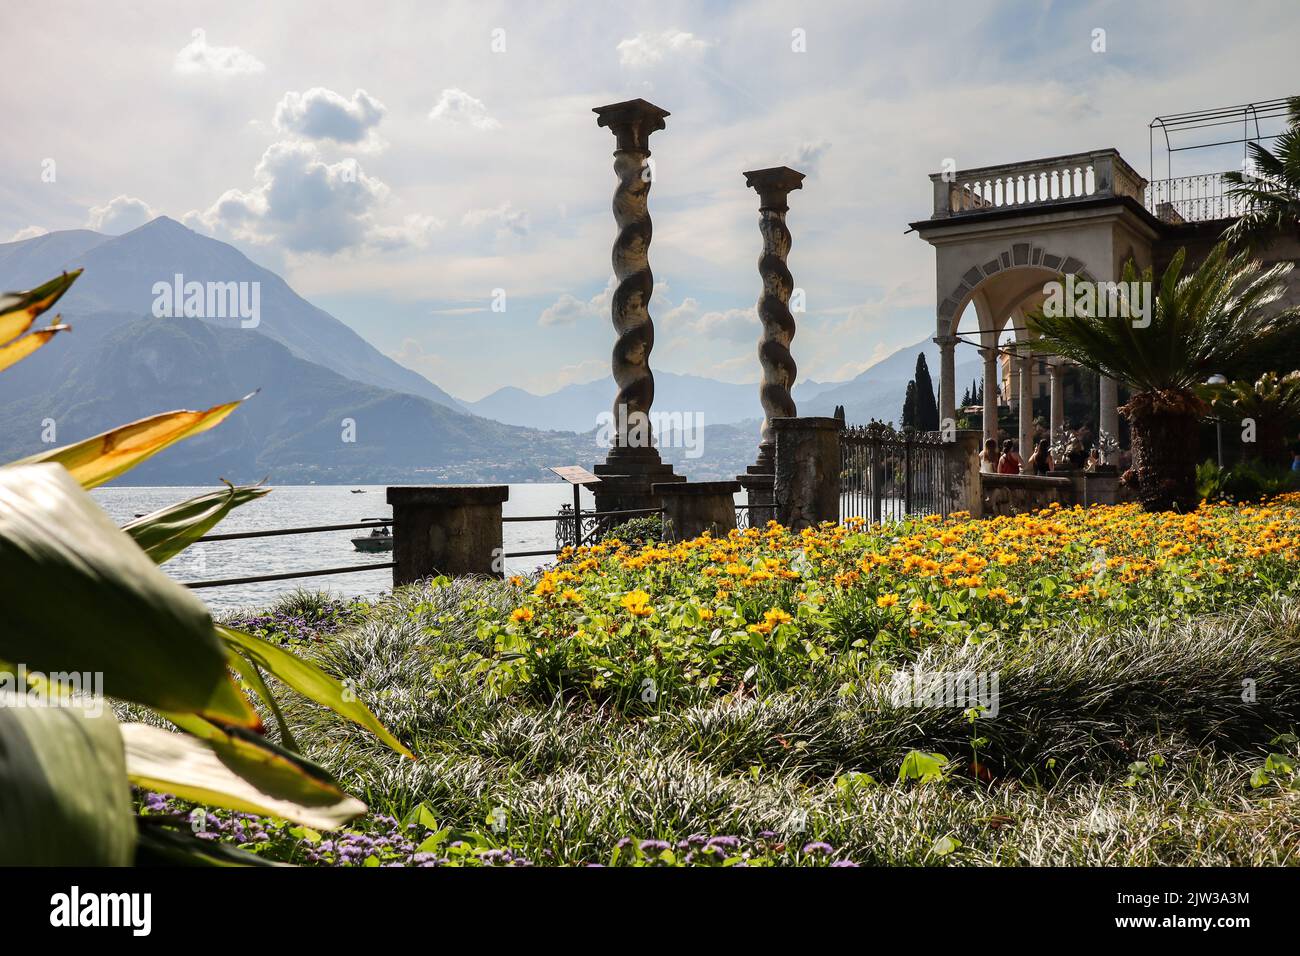 Picturesque Botanic Garden in Varenna during Sunny Day. Italian Tourist Destination in Lombardy. Stock Photo